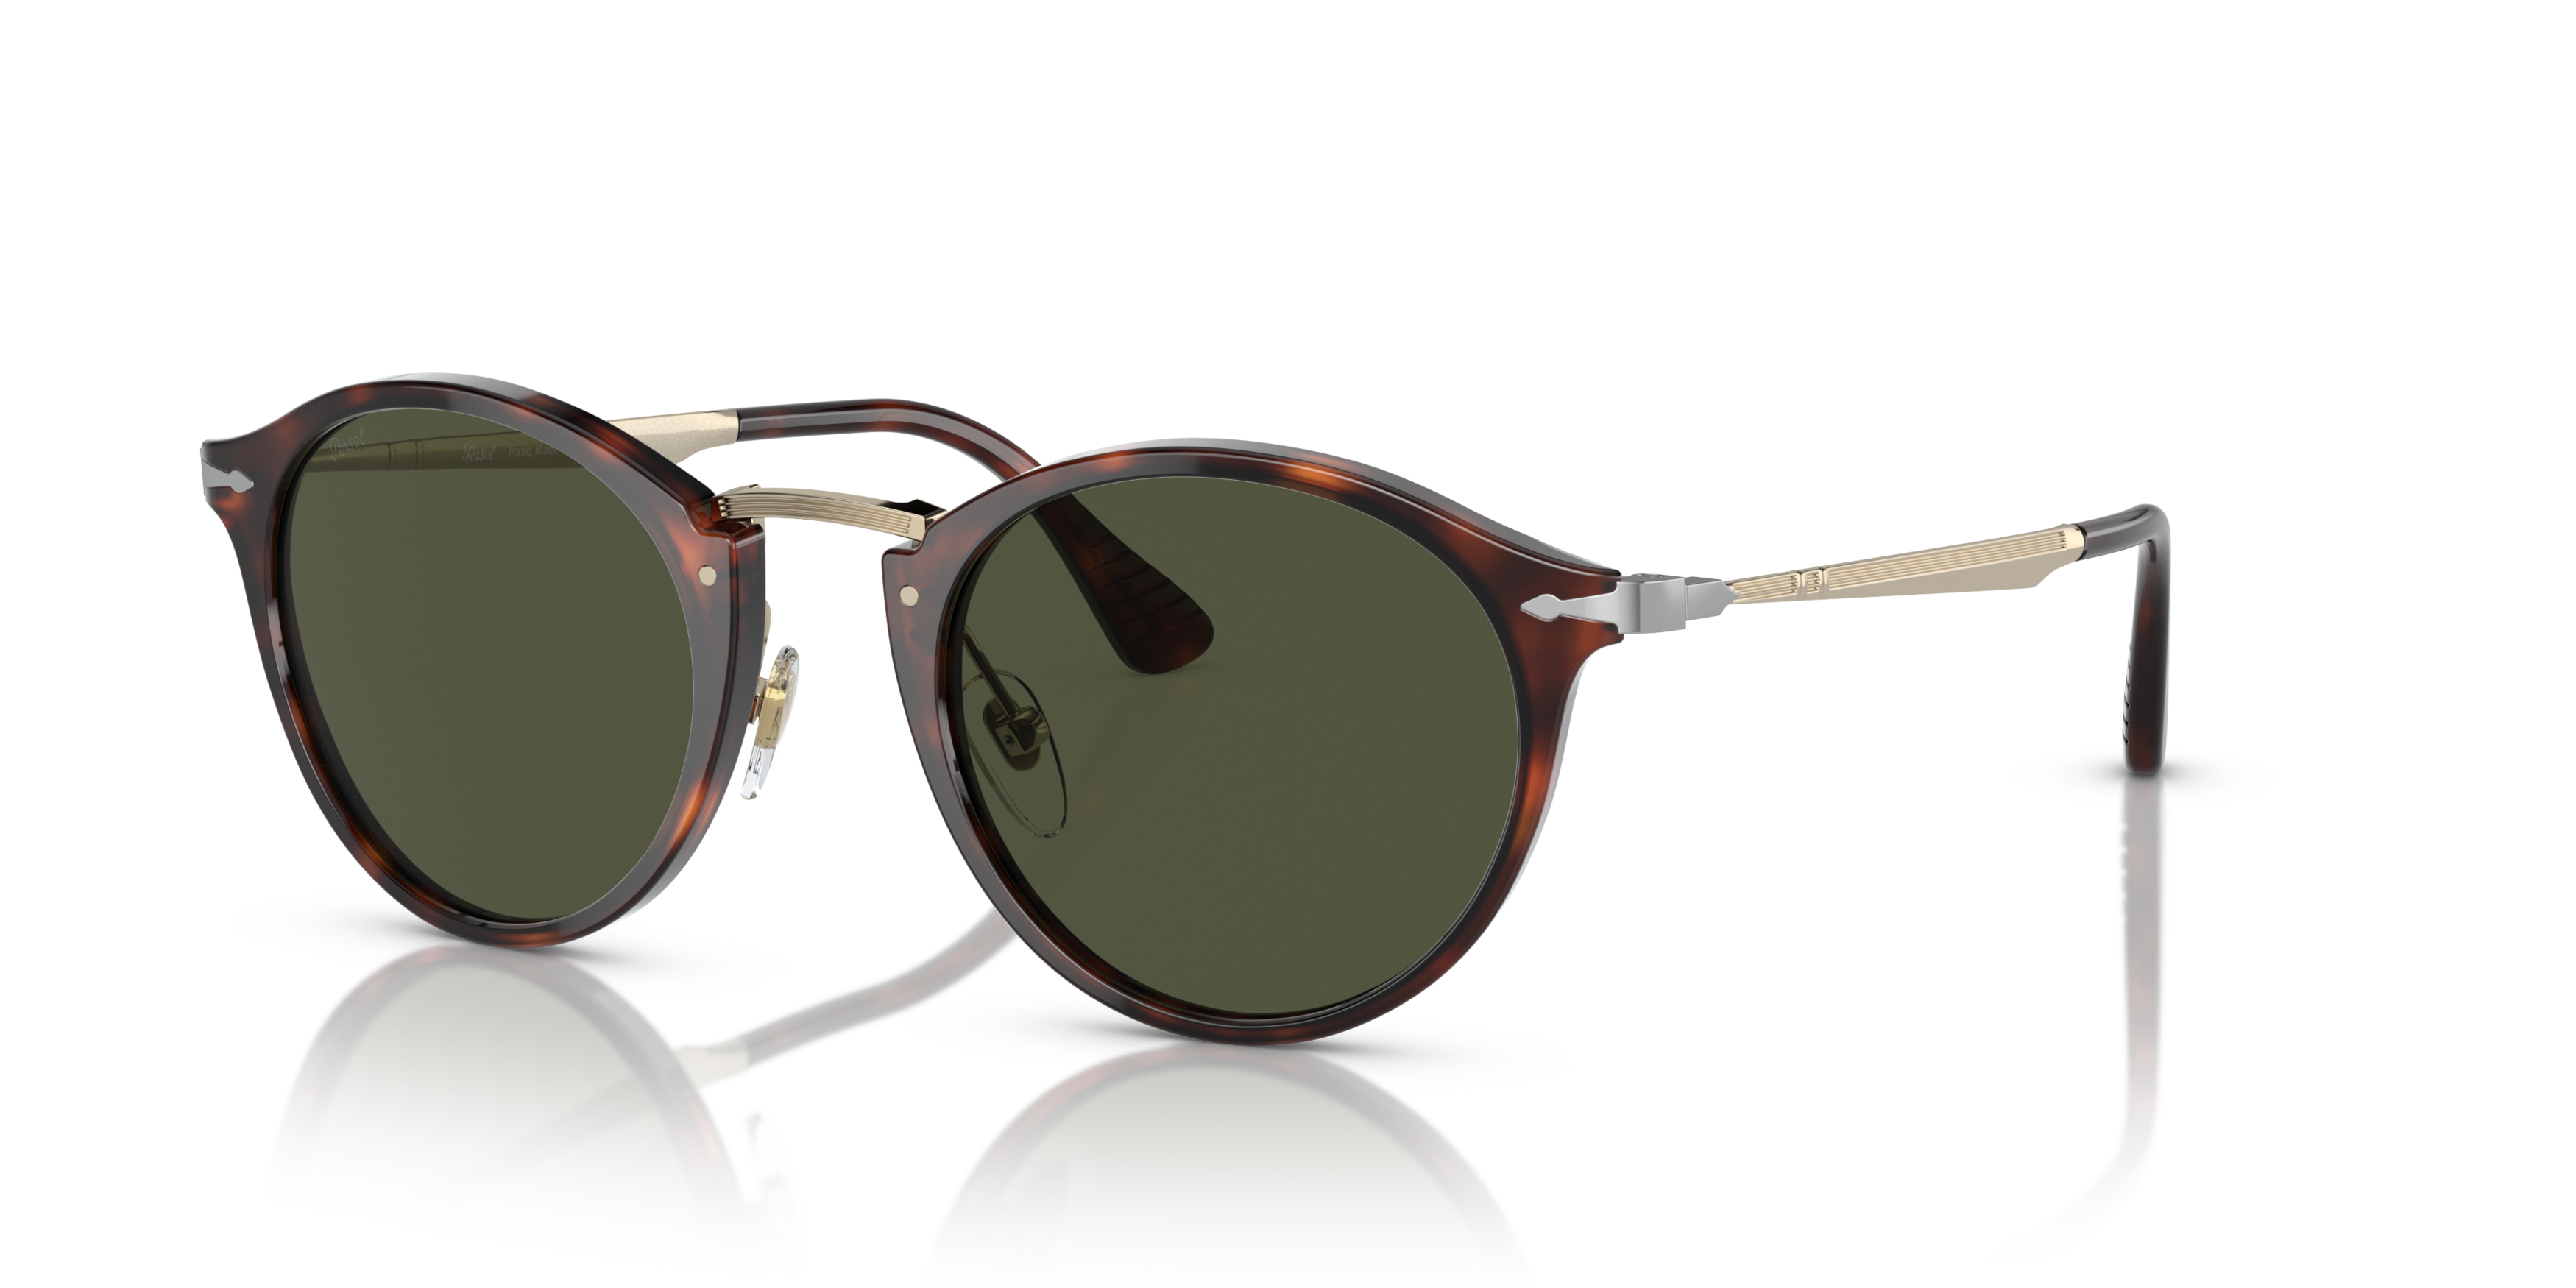 [products.image.angle_left01] Persol 0PO3166S 24/31